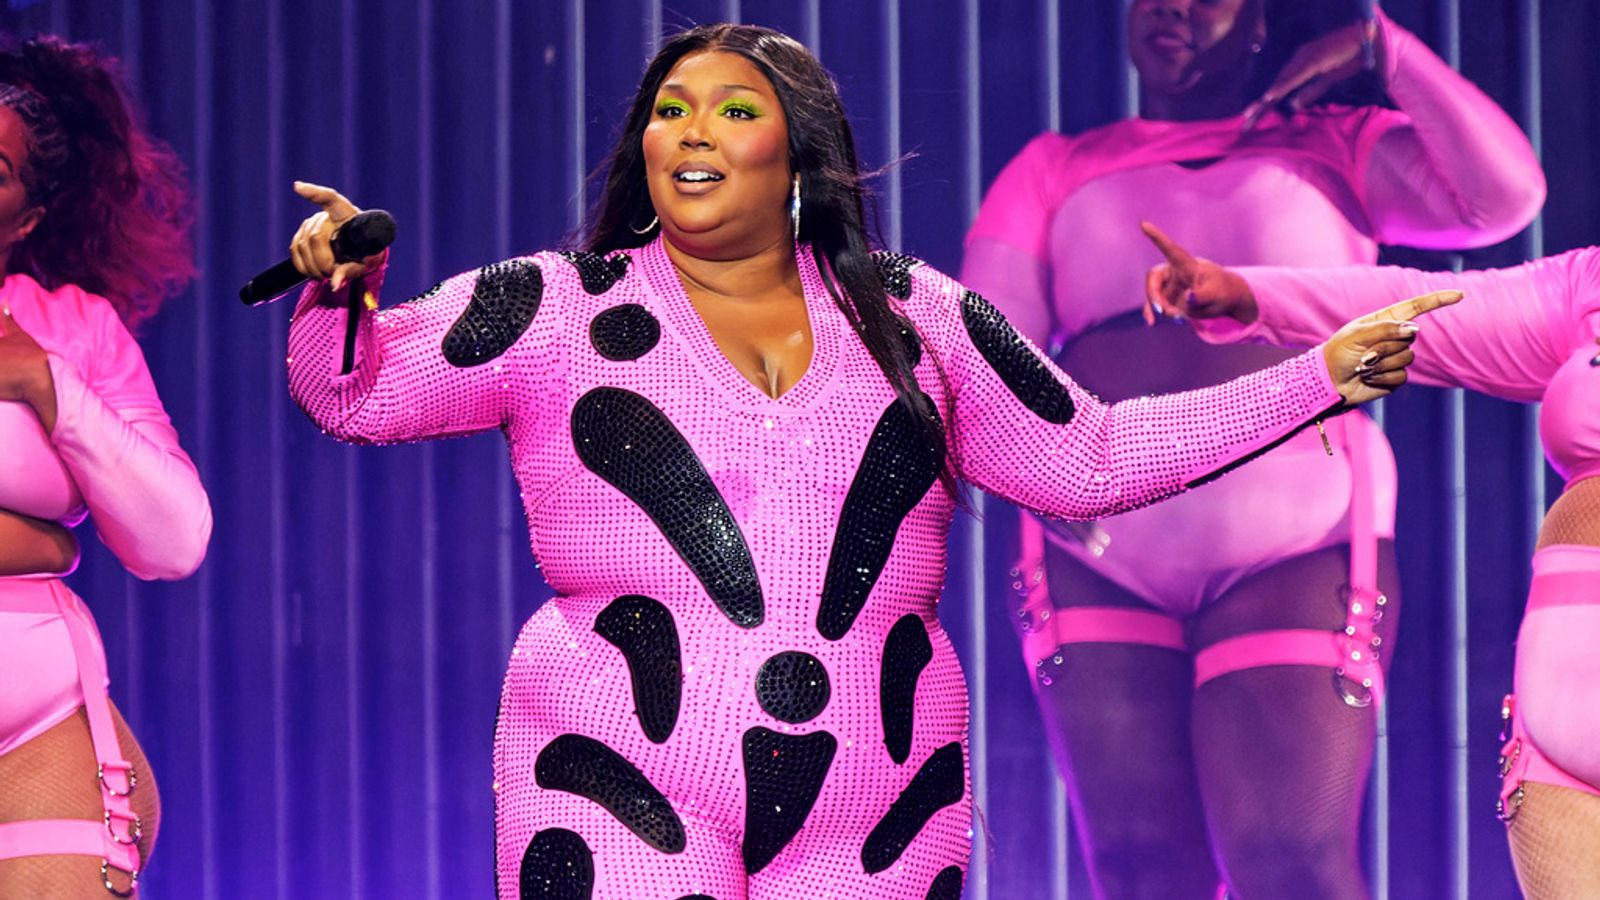 Lizzo: More complaints about singer being investigated in wake of lawsuit